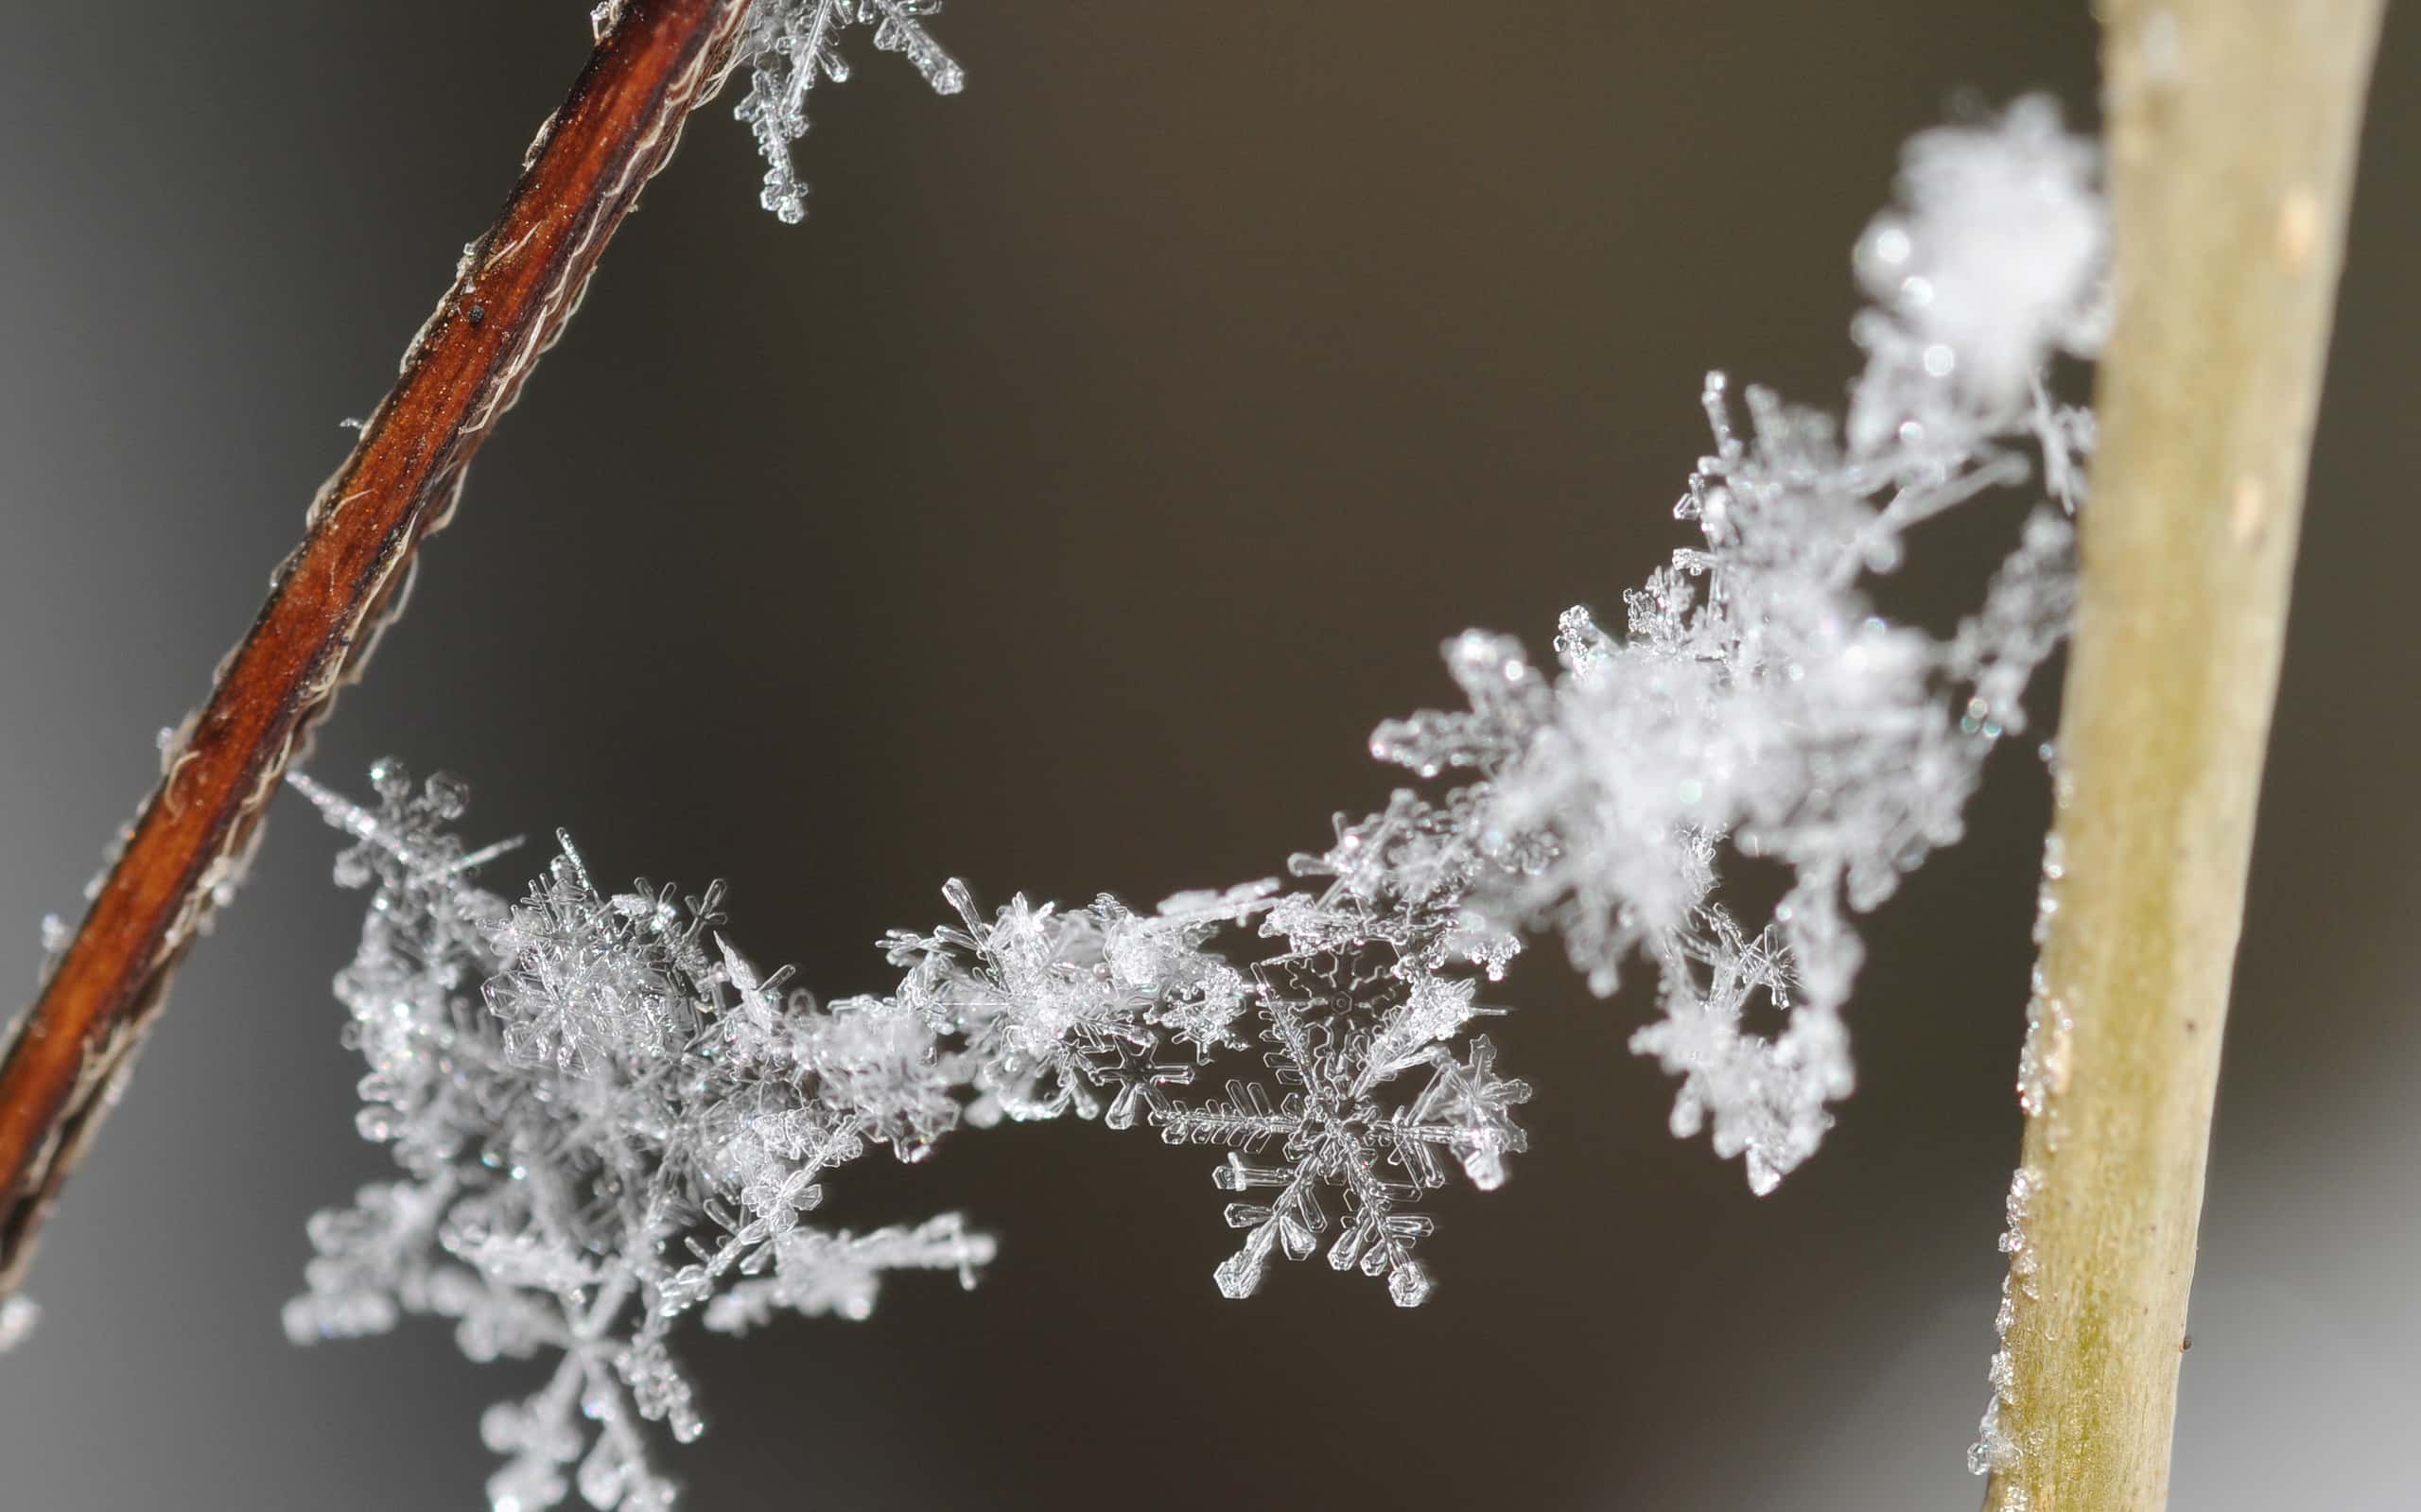 One of 18 Amazing Facts About Snowflakes: Several factors give them their unique shapes.